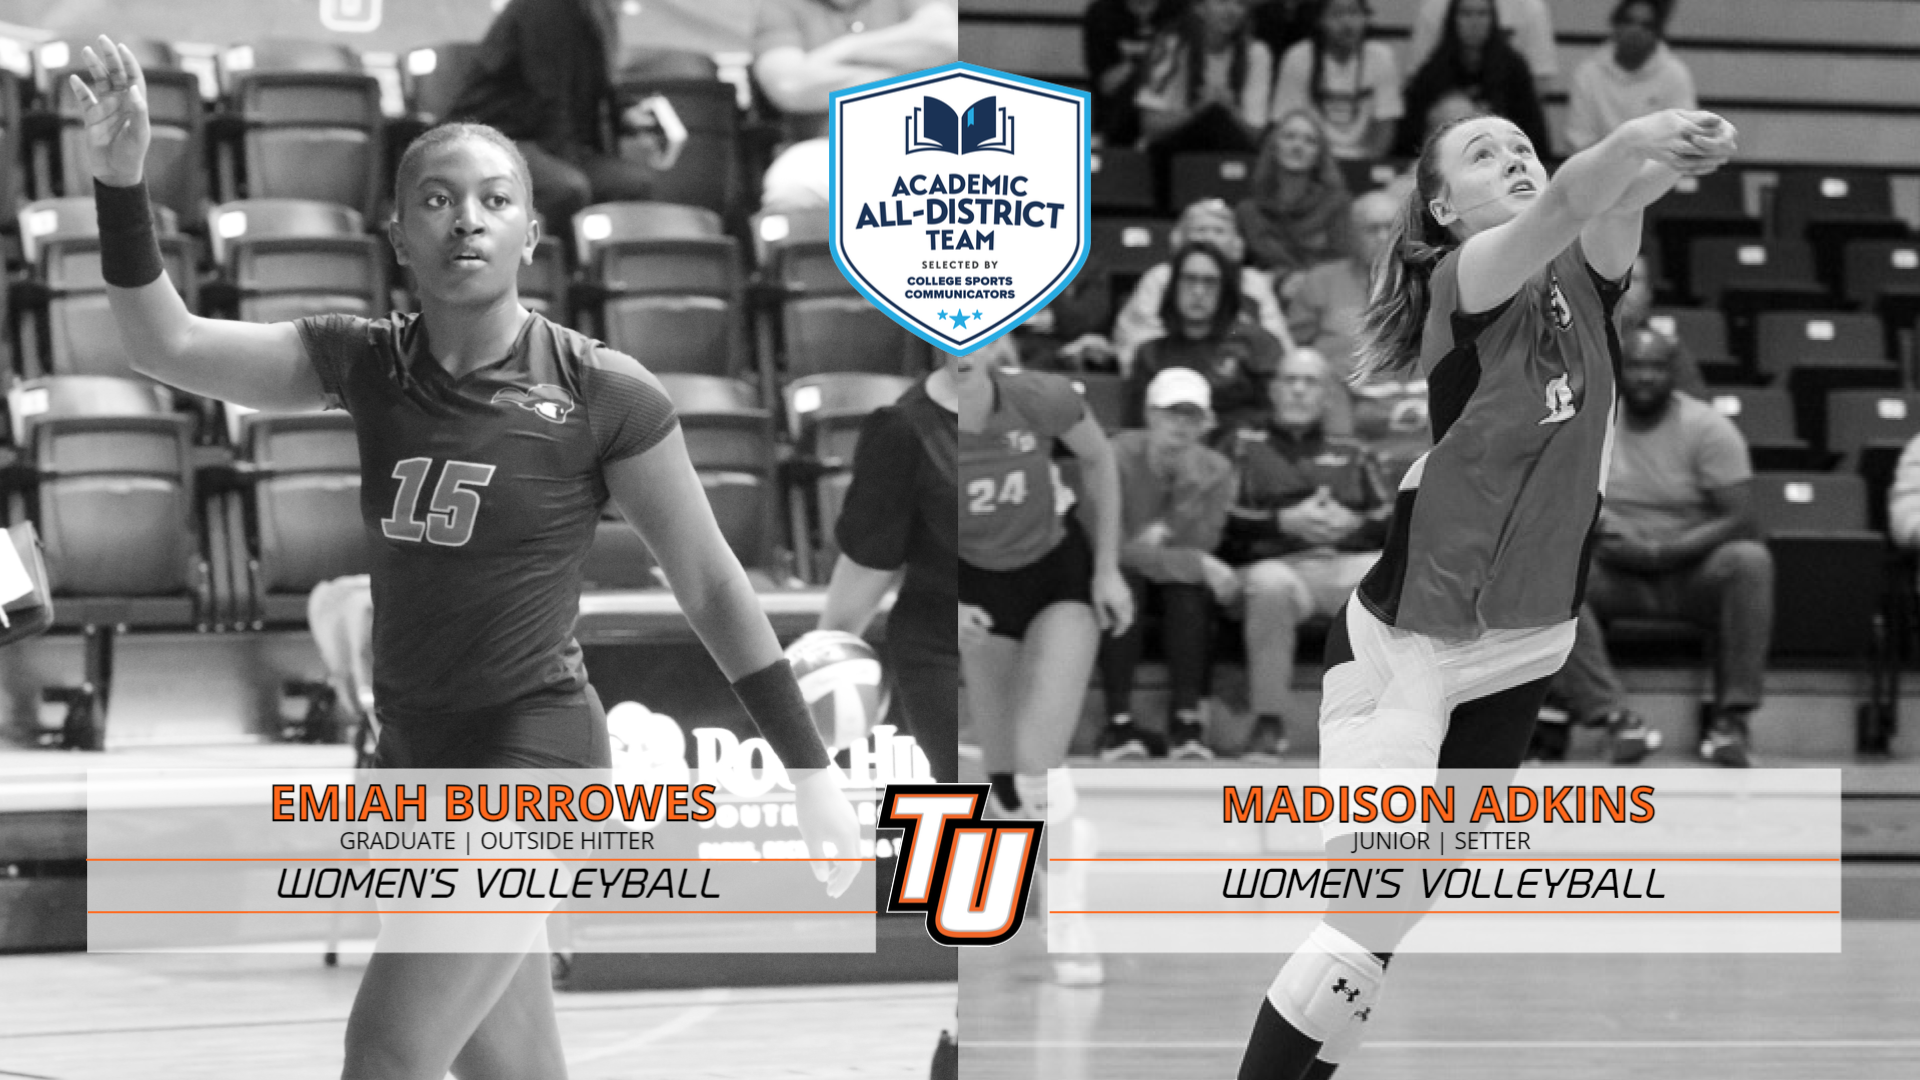 Burrowes, Adkins named to CSC Academic All-District Team